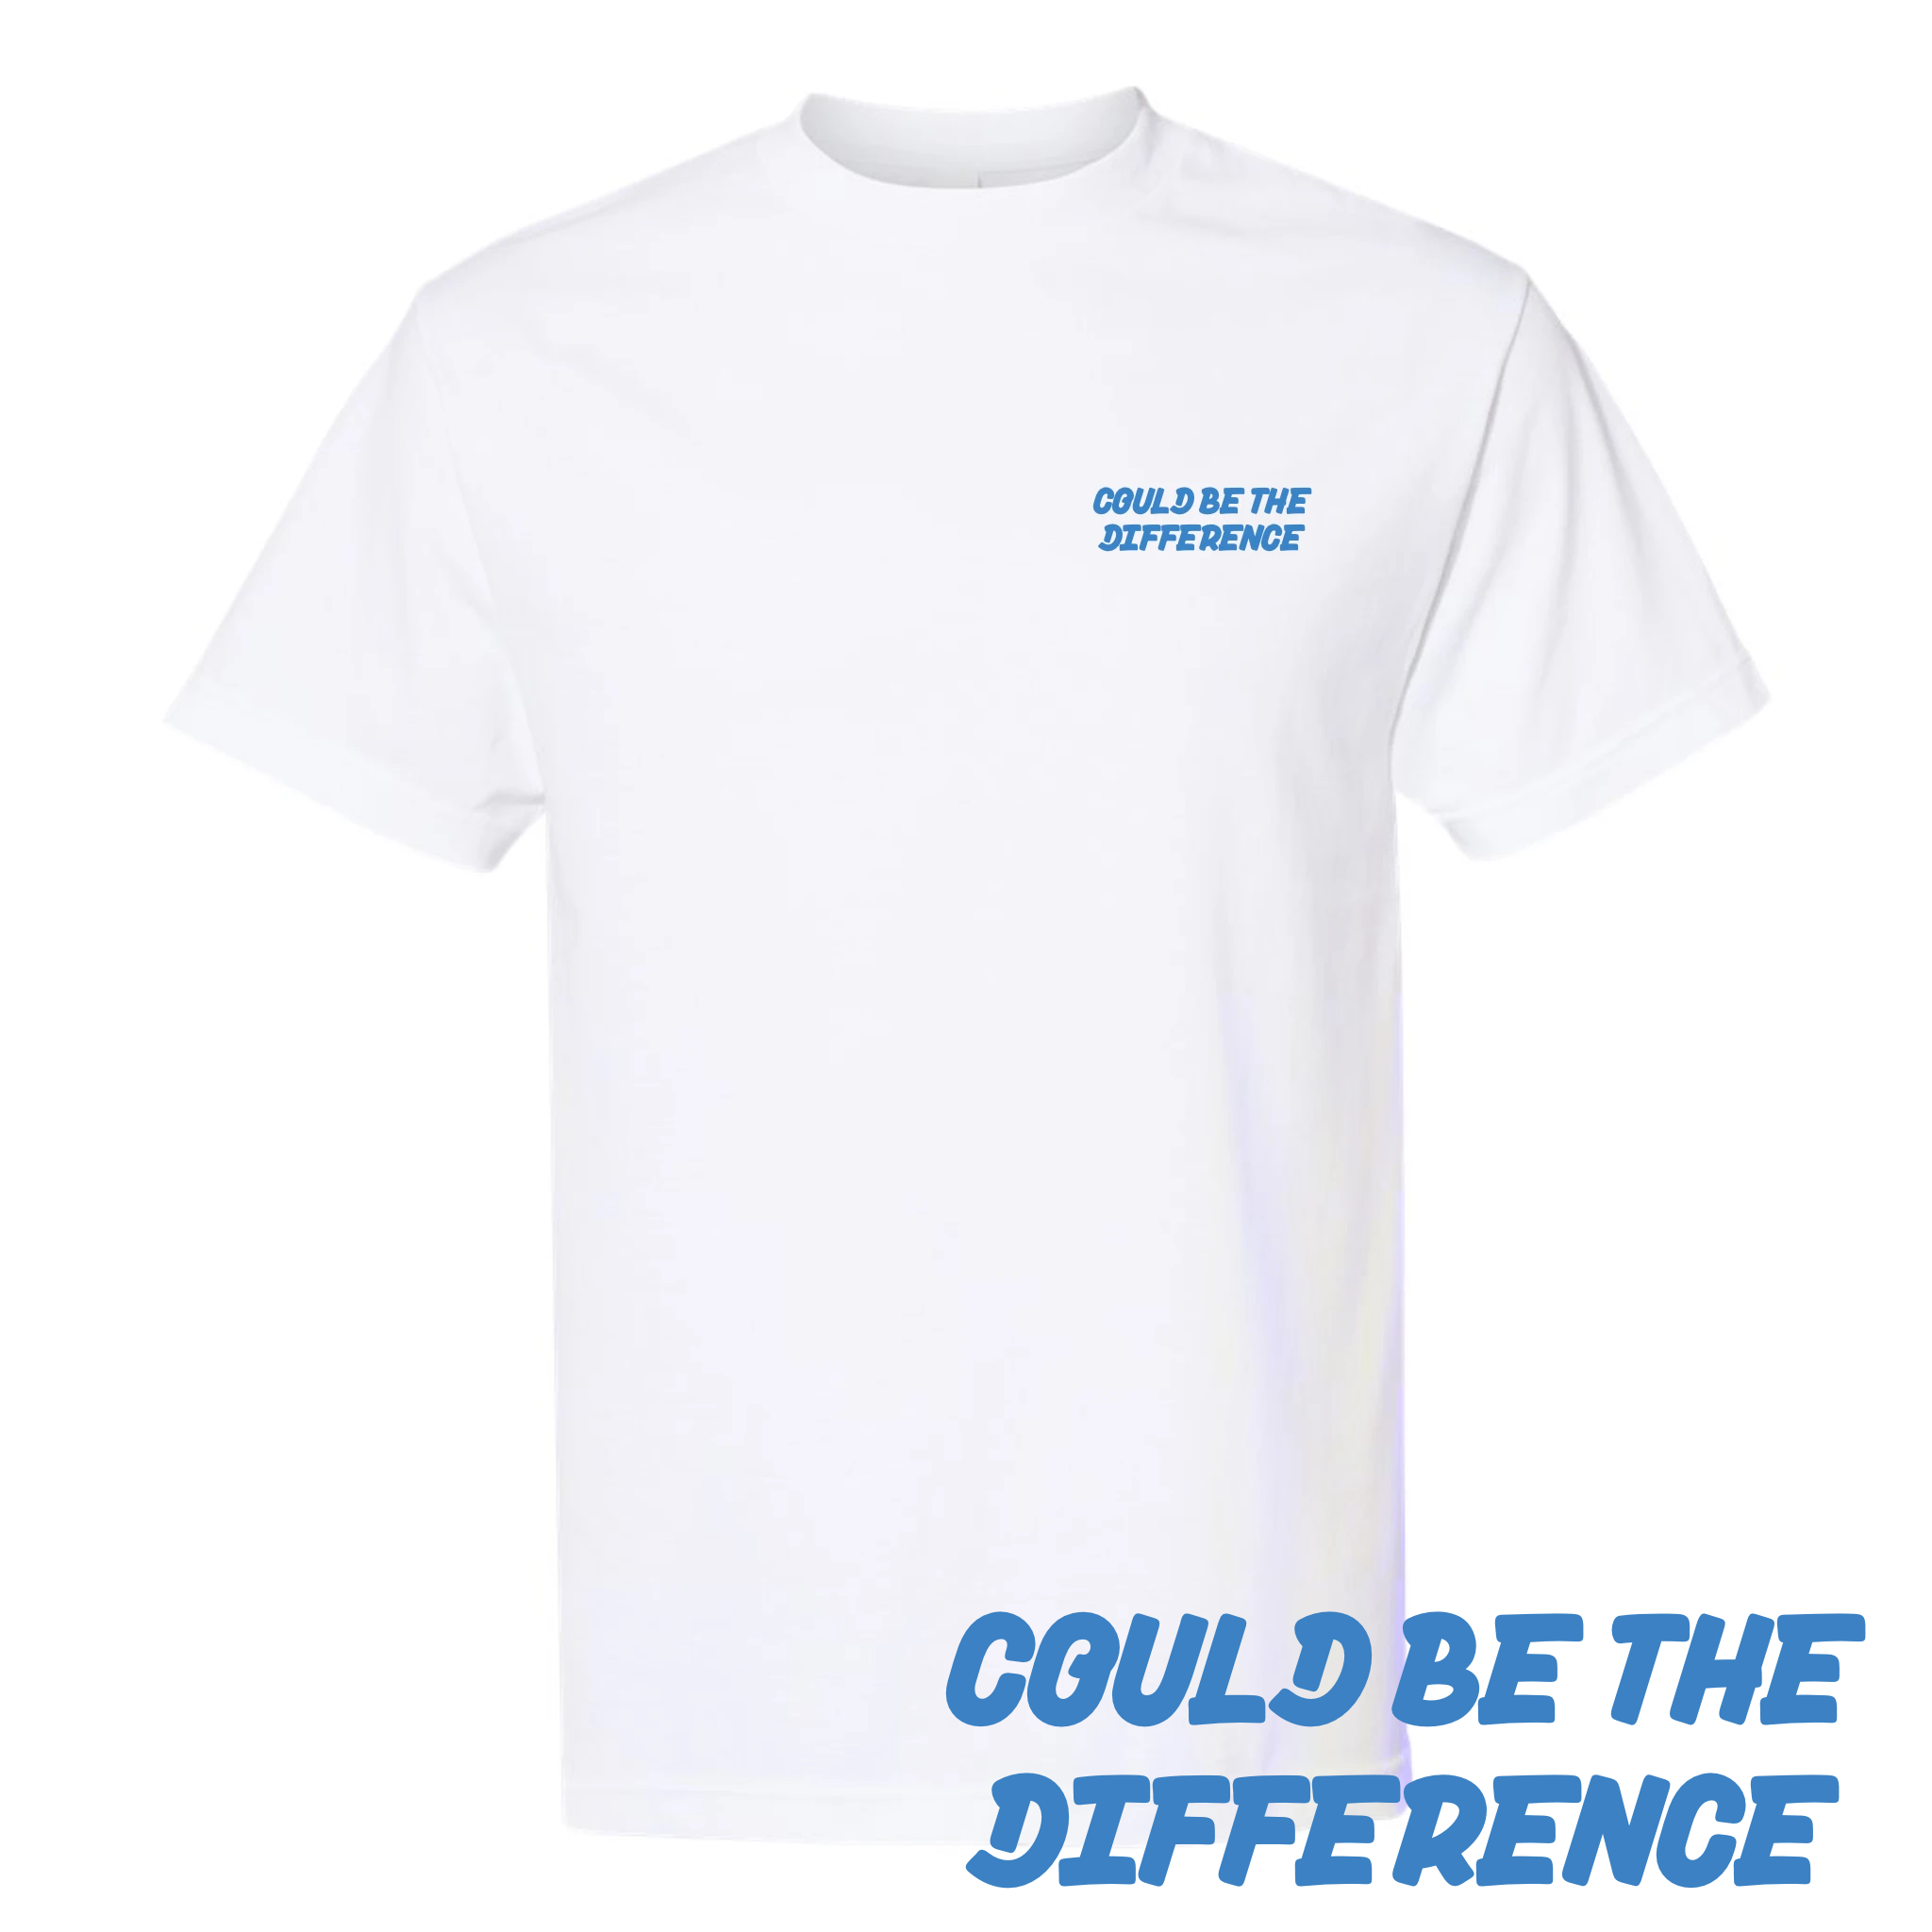 Could be the difference Tee